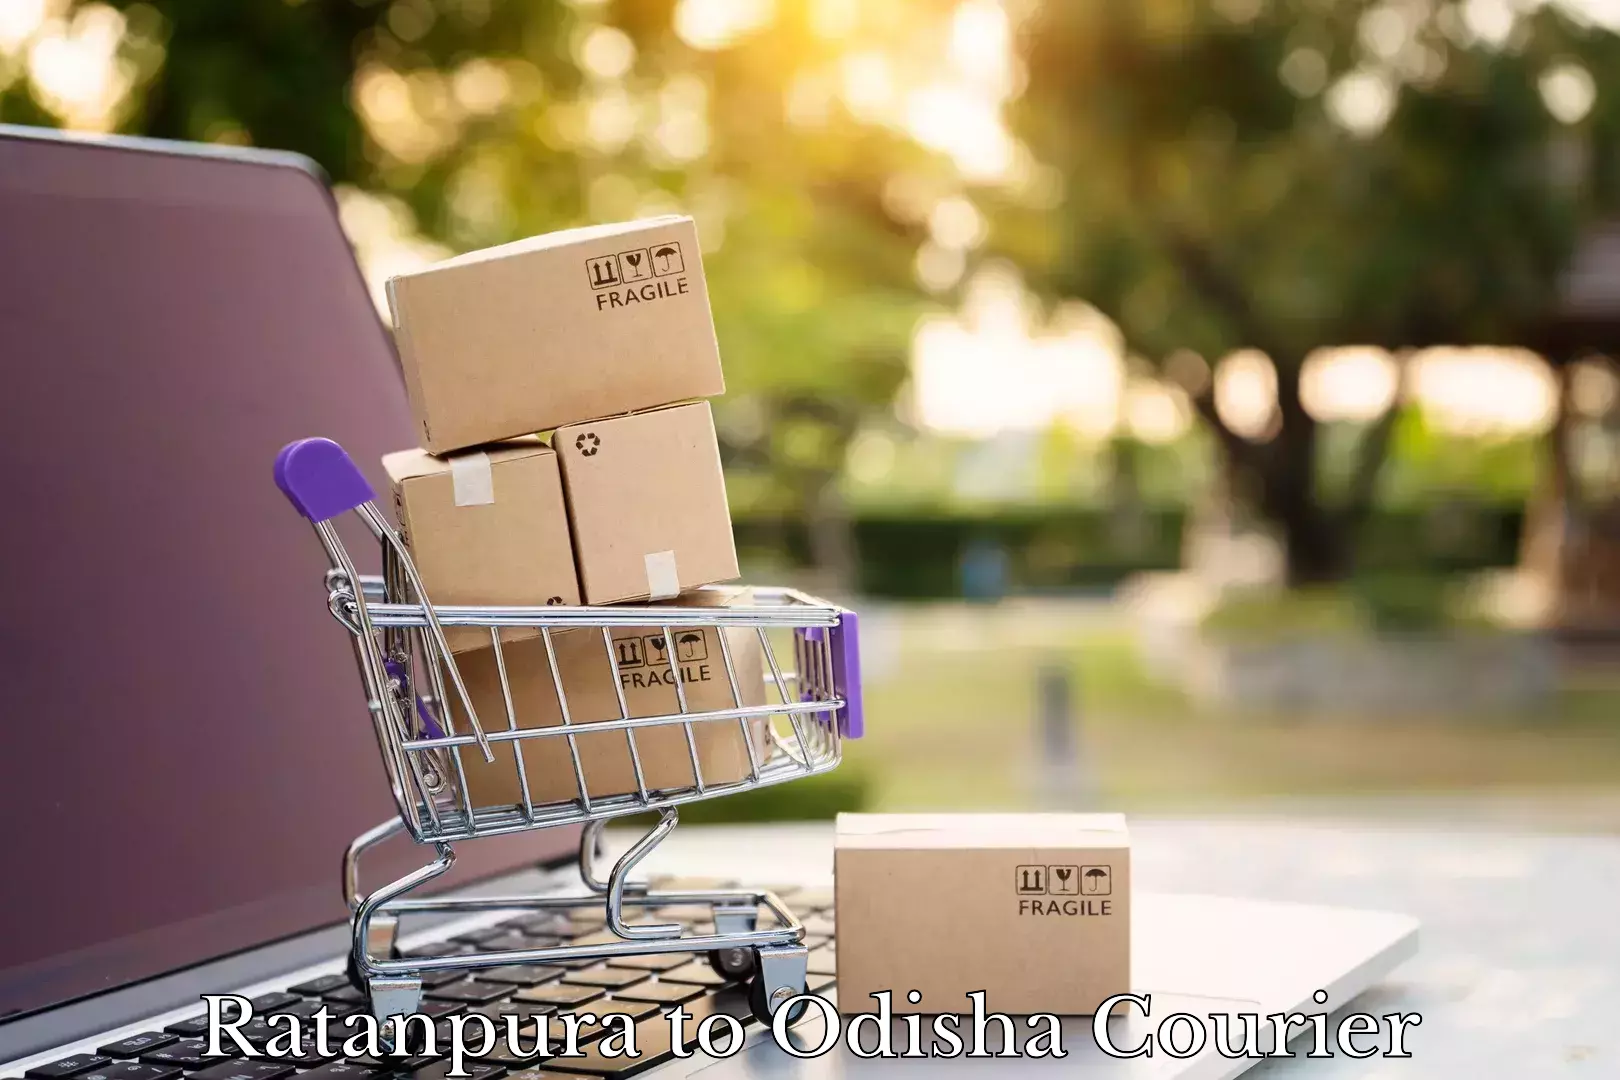 Large package courier in Ratanpura to Odisha